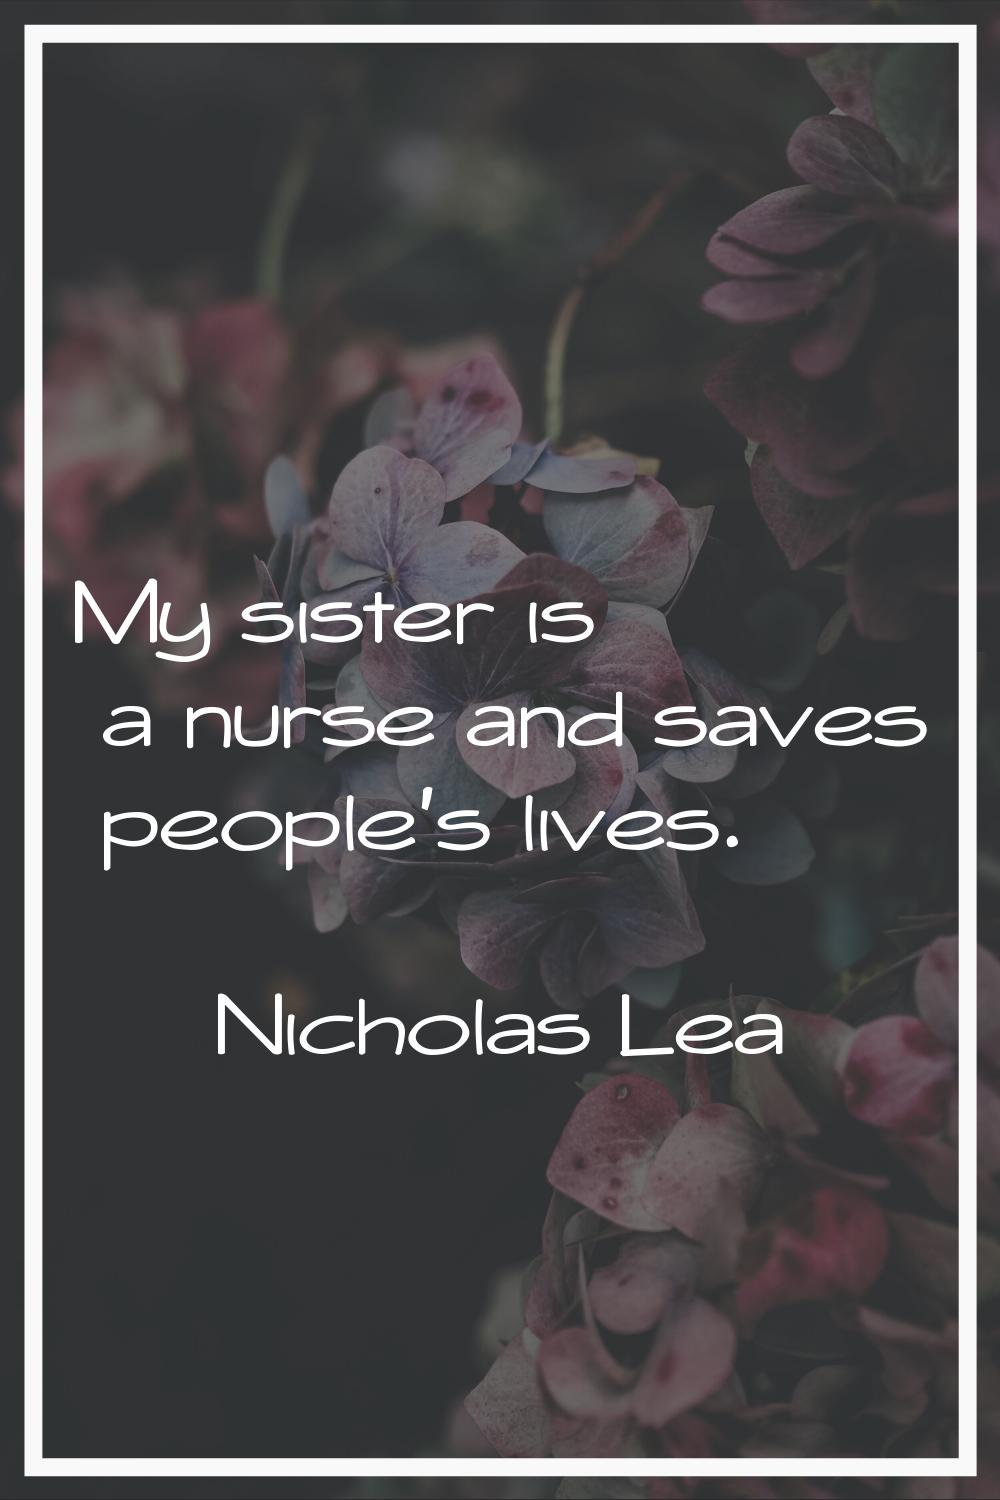 My sister is a nurse and saves people's lives.